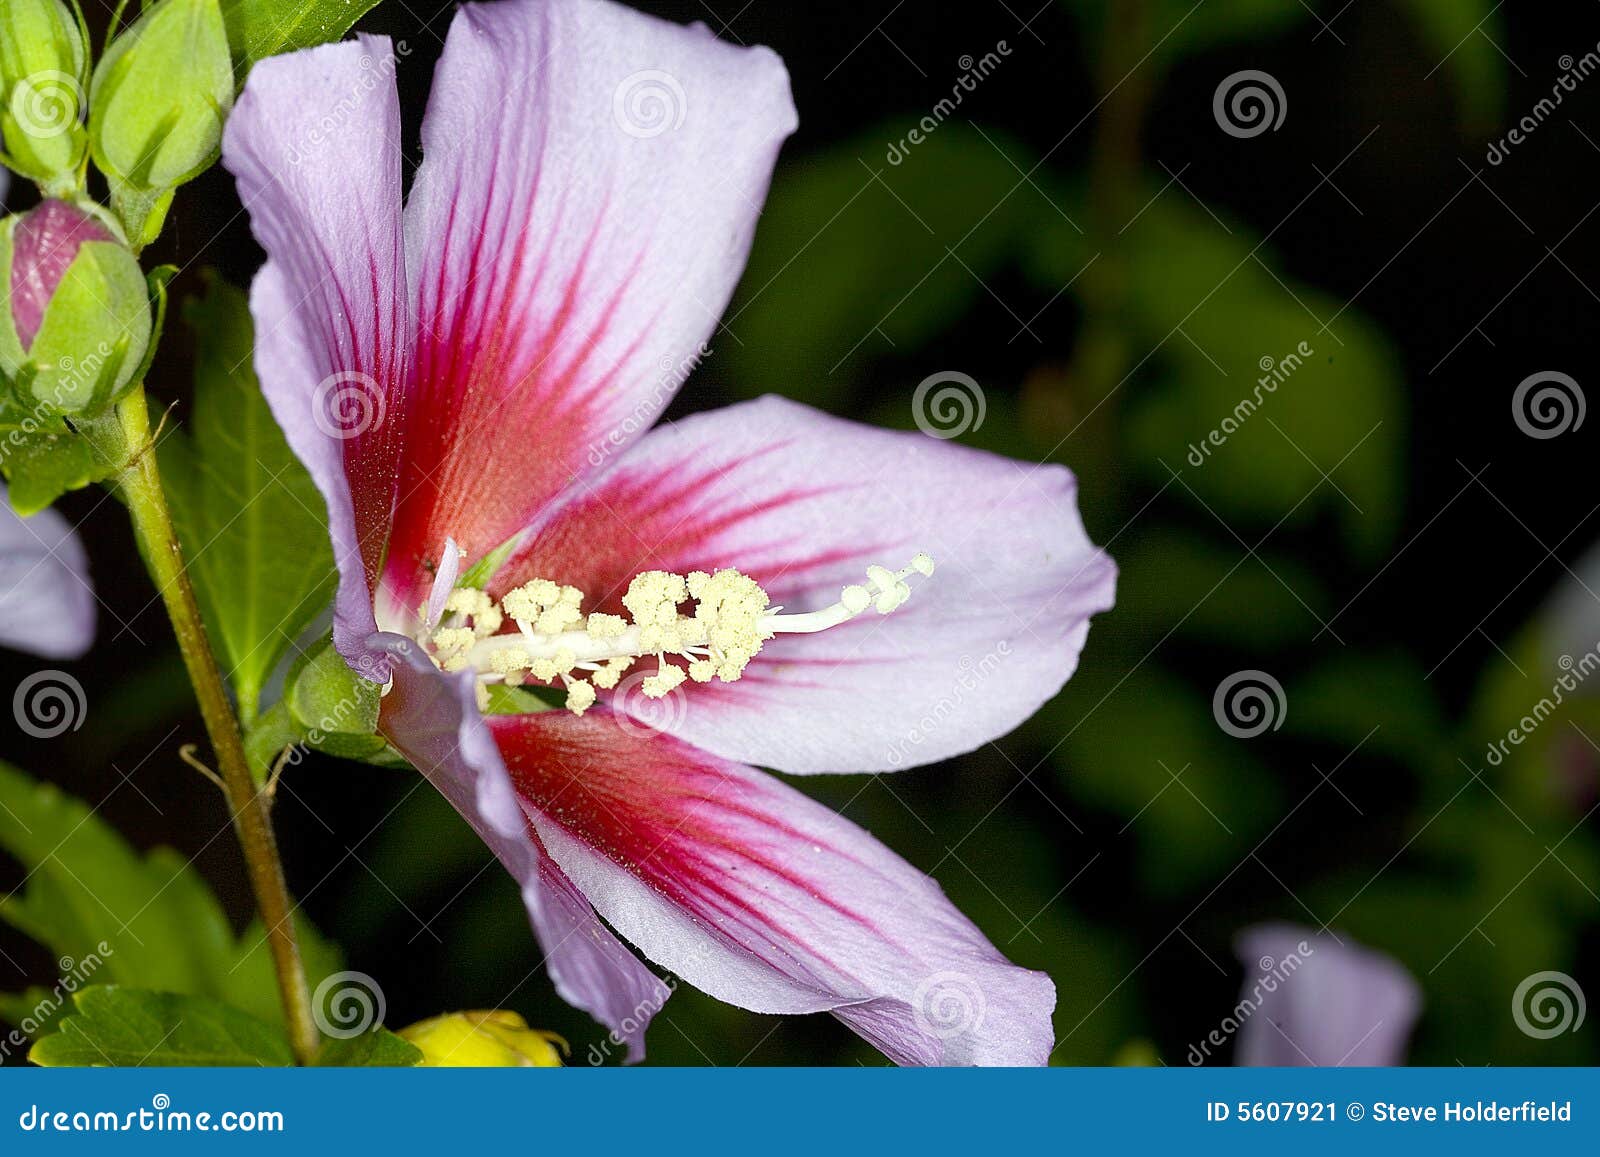 clipart rose of sharon - photo #34